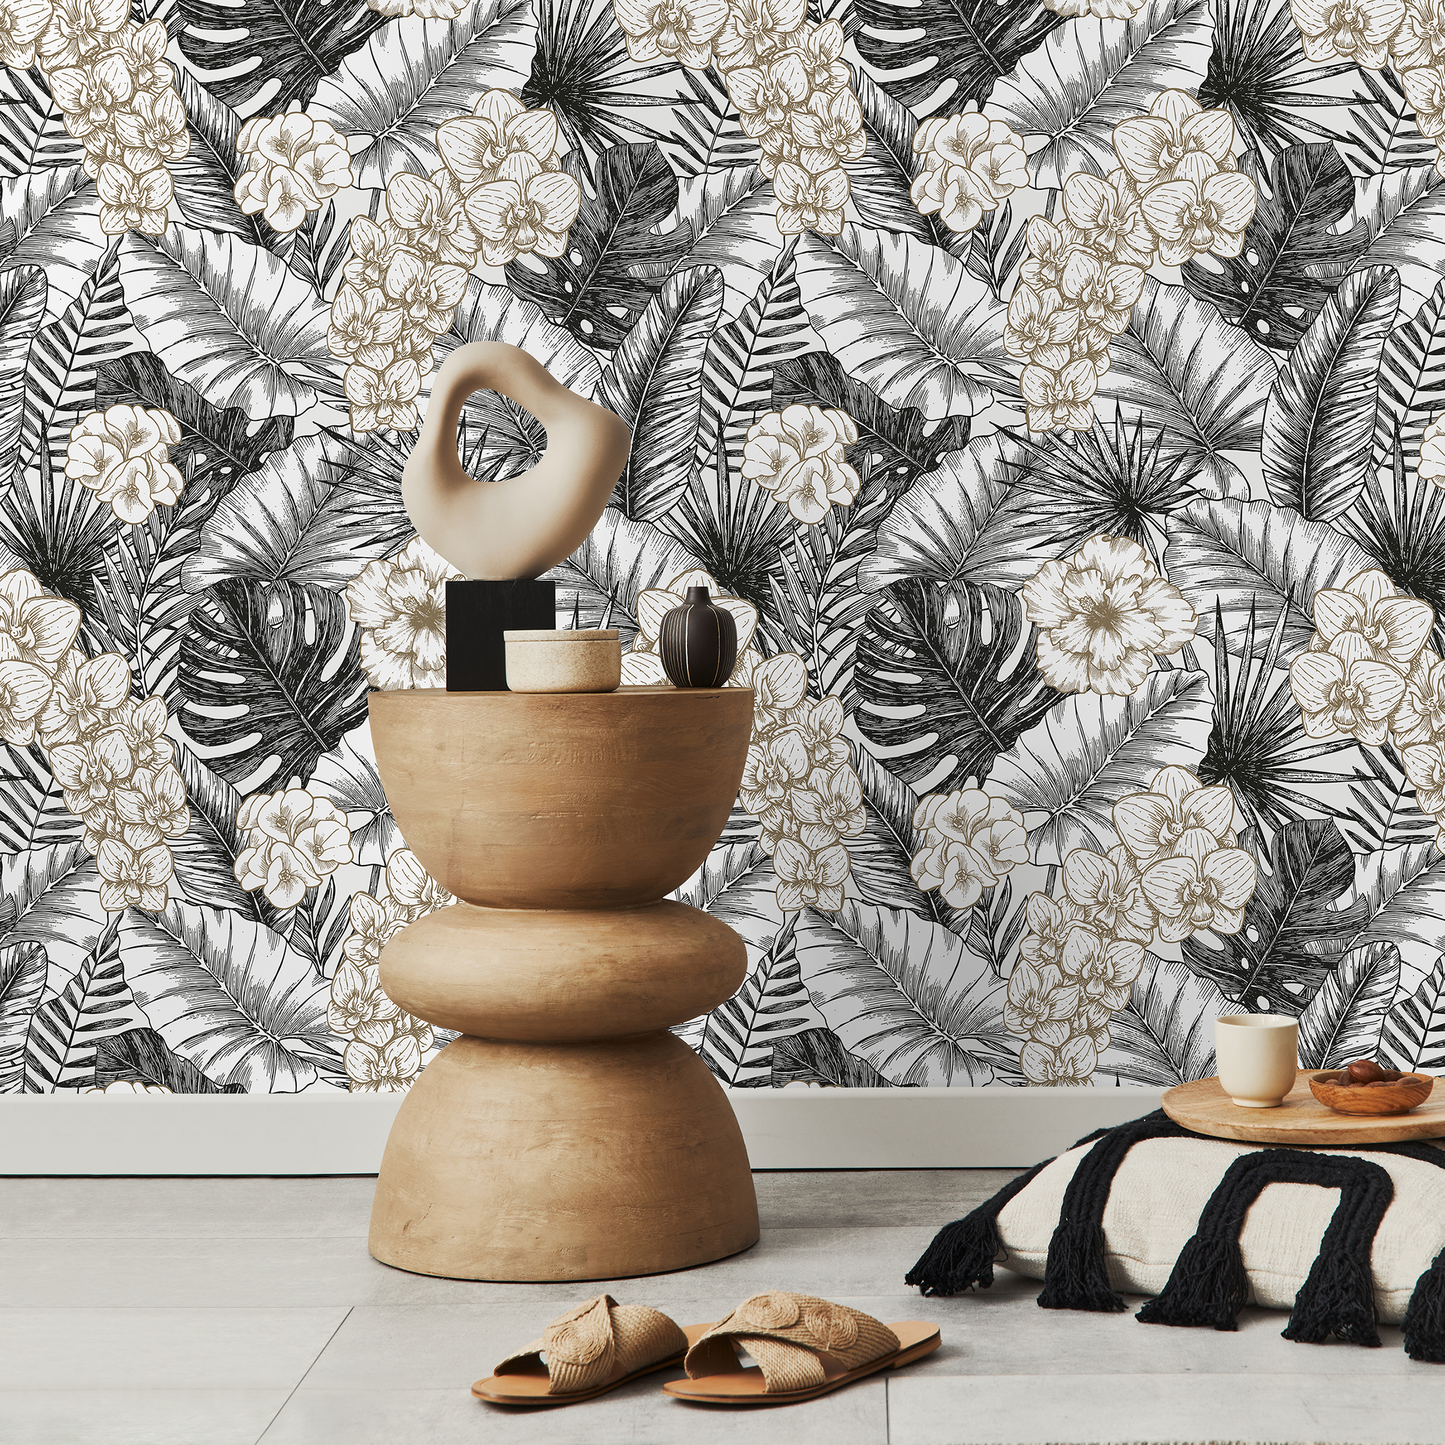 Vintage Tropical Wallpaper Leaves Wallpaper Peel and Stick and Traditional Wallpaper - A446